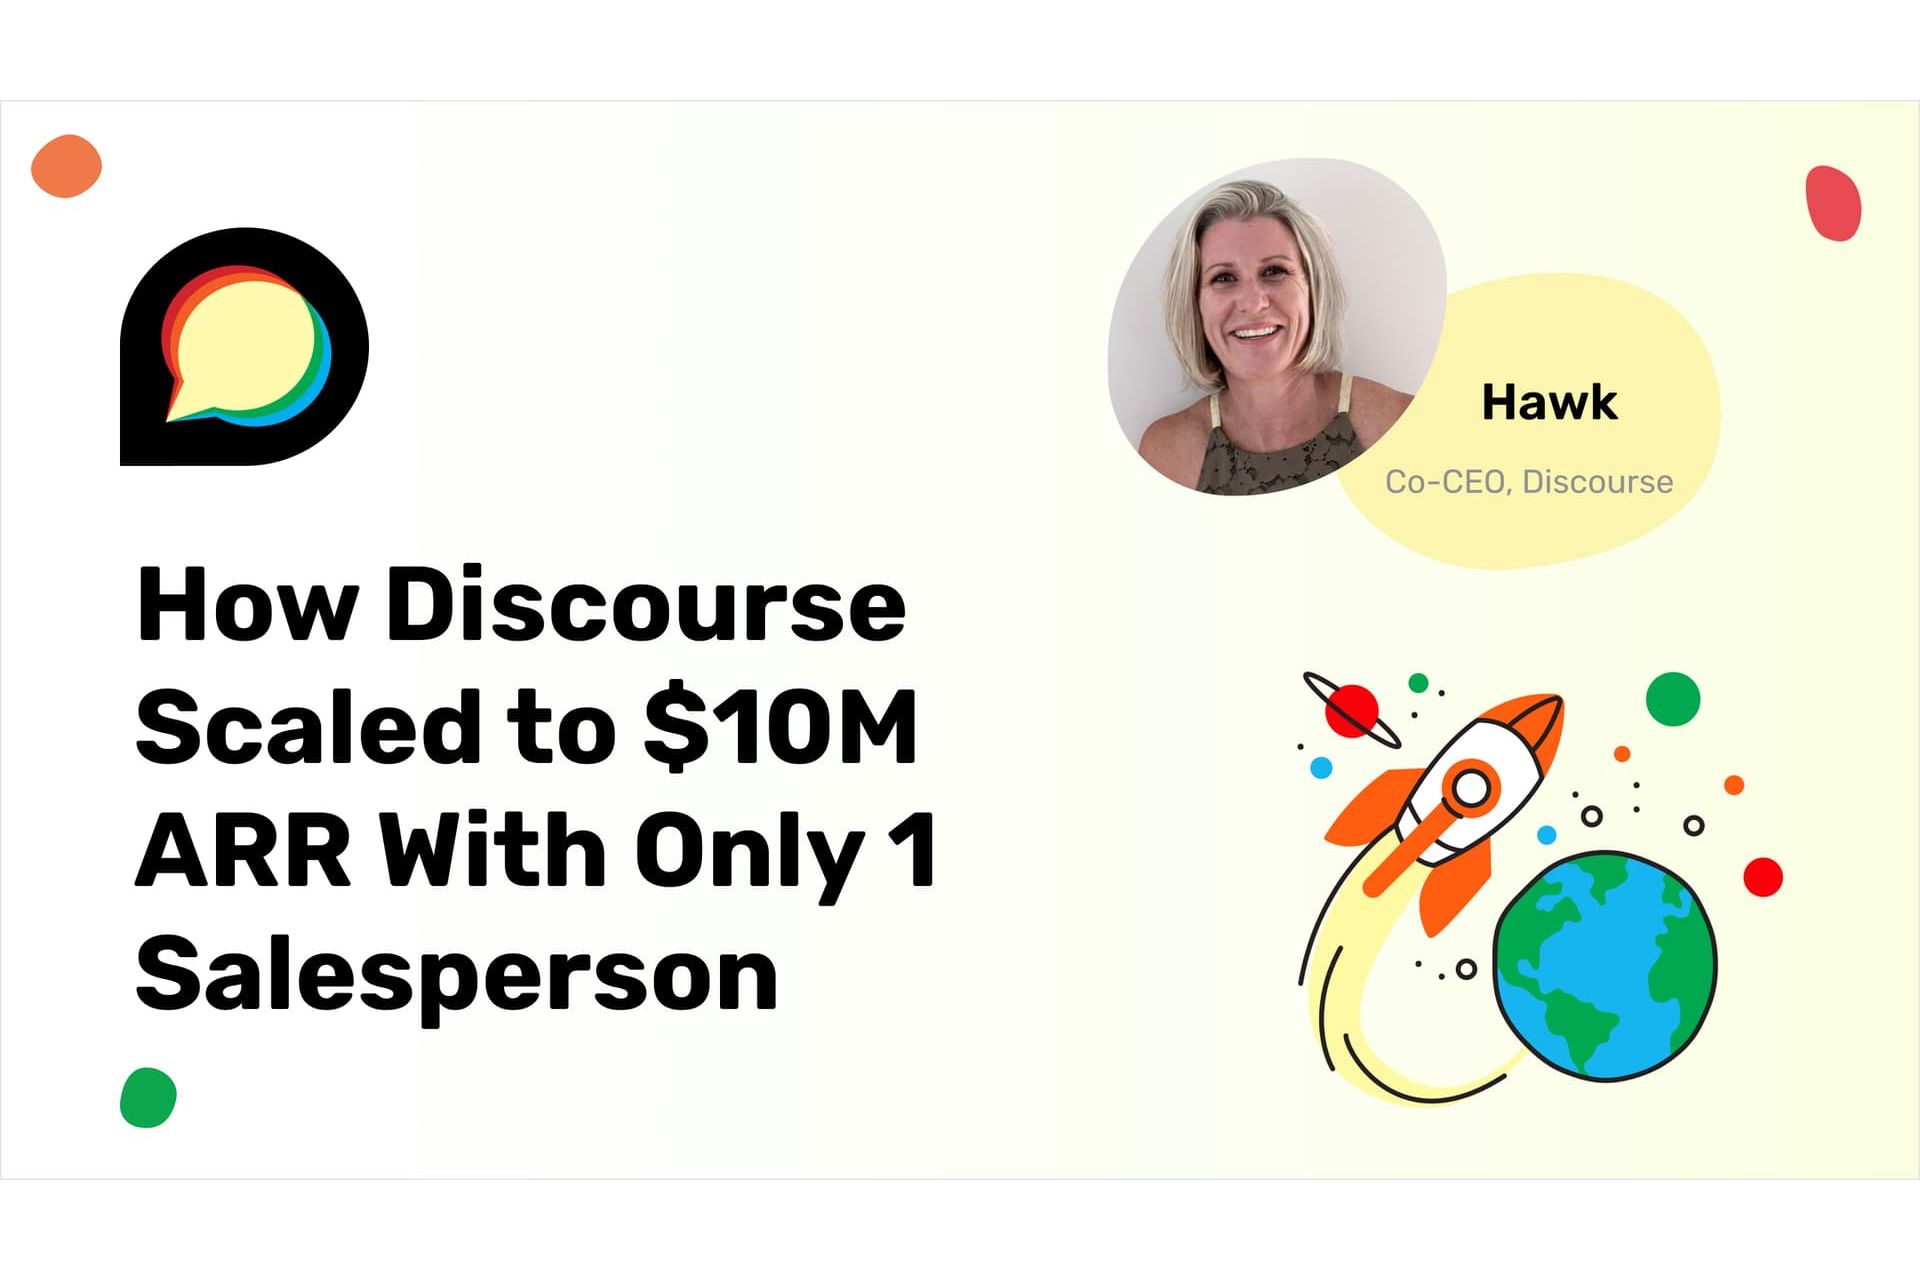 How Discourse Scaled to $10M ARR With Only 1 Salesperson